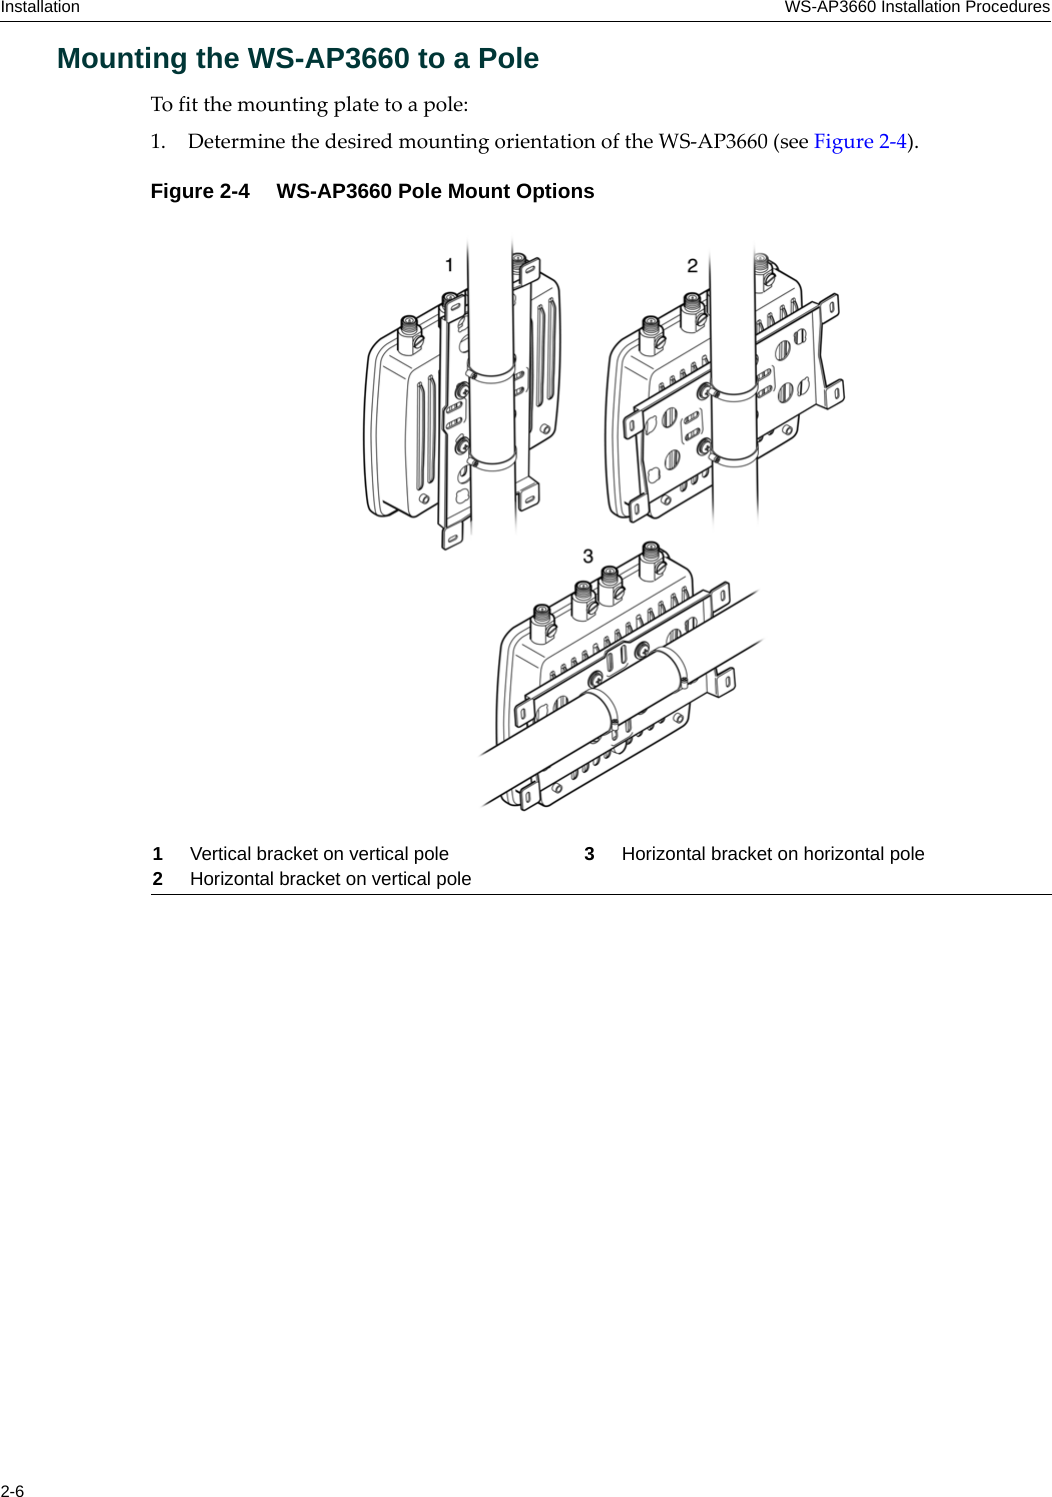 Installation WS-AP3660 Installation Procedures2-6Mounting the WS-AP3660 to a PoleTo fit the mounting plate to a pole:1. Determine the desired mounting orientation of the WS-AP3660 (see Figure 2-4).Figure 2-4  WS-AP3660 Pole Mount Options1Vertical bracket on vertical pole 3Horizontal bracket on horizontal pole2Horizontal bracket on vertical pole